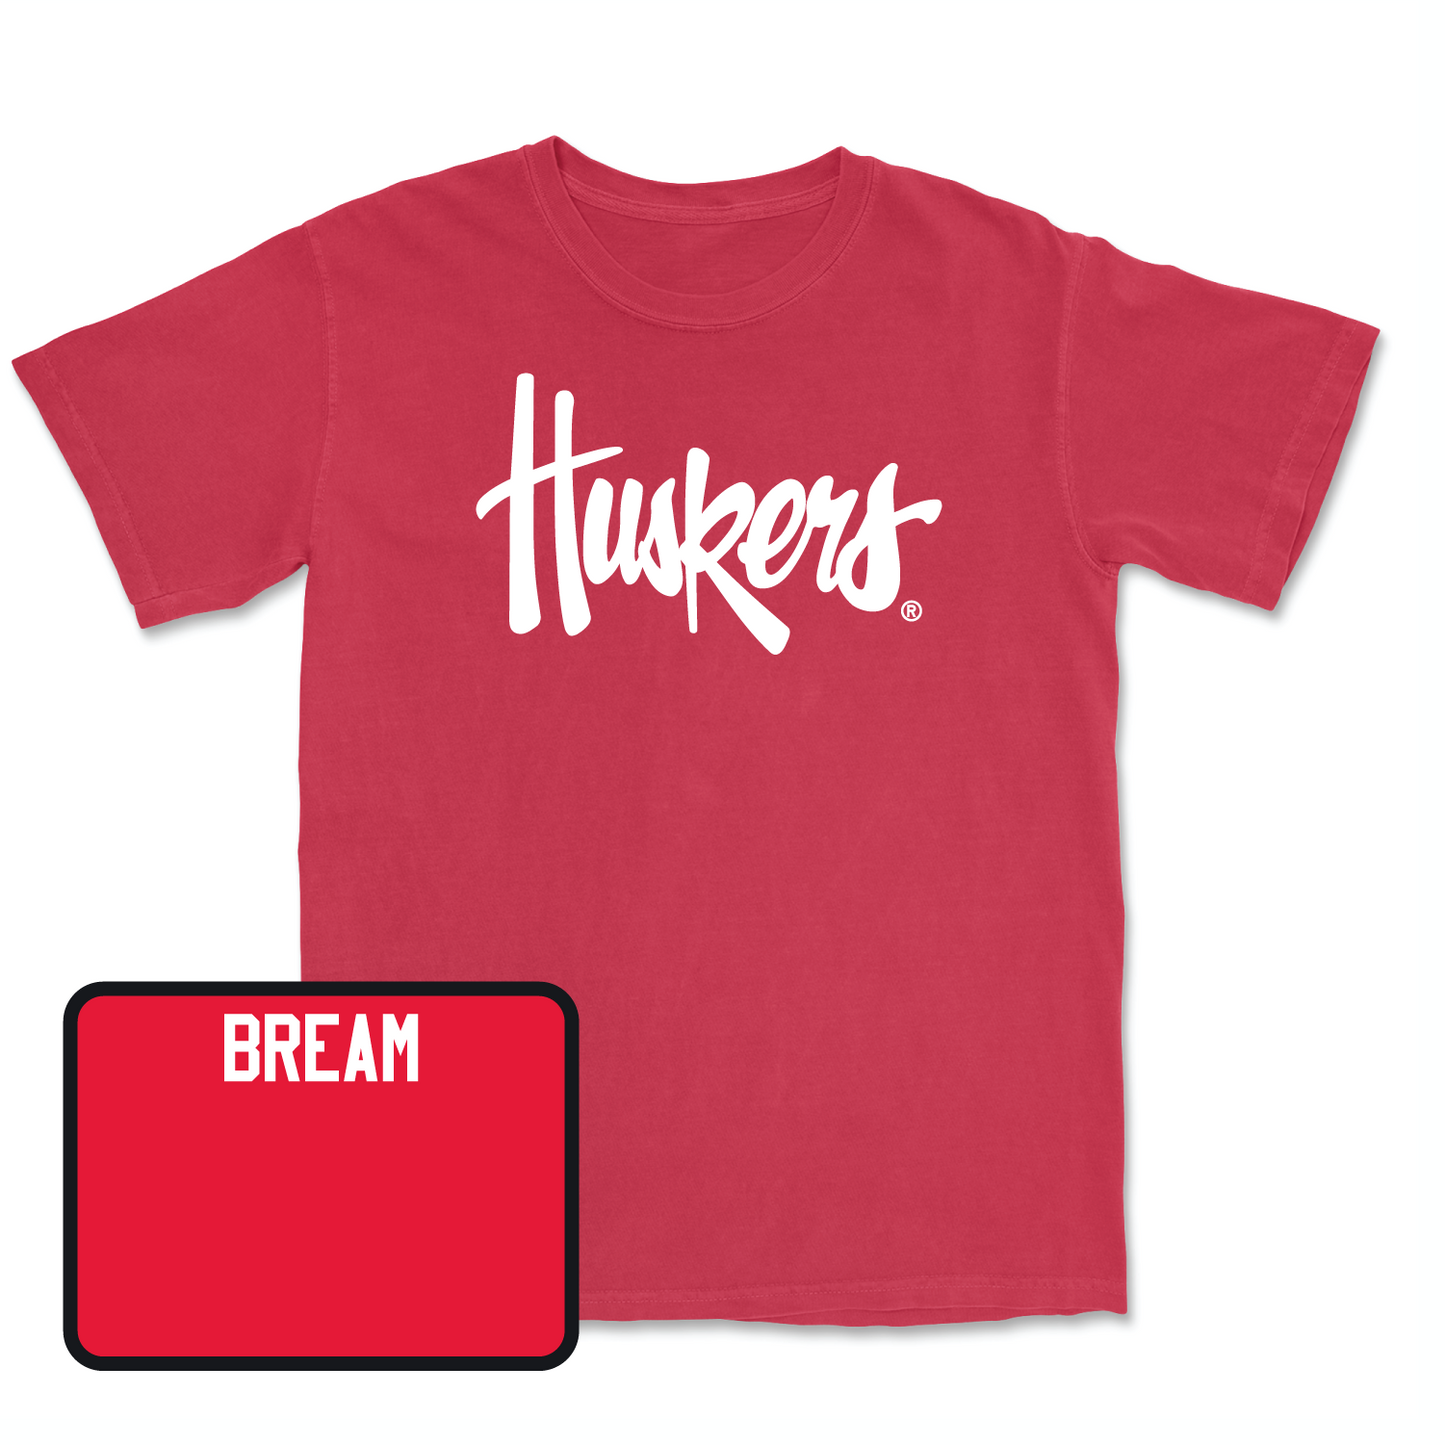 Red Women's Golf Huskers Tee 3X-Large / Brooke Bream